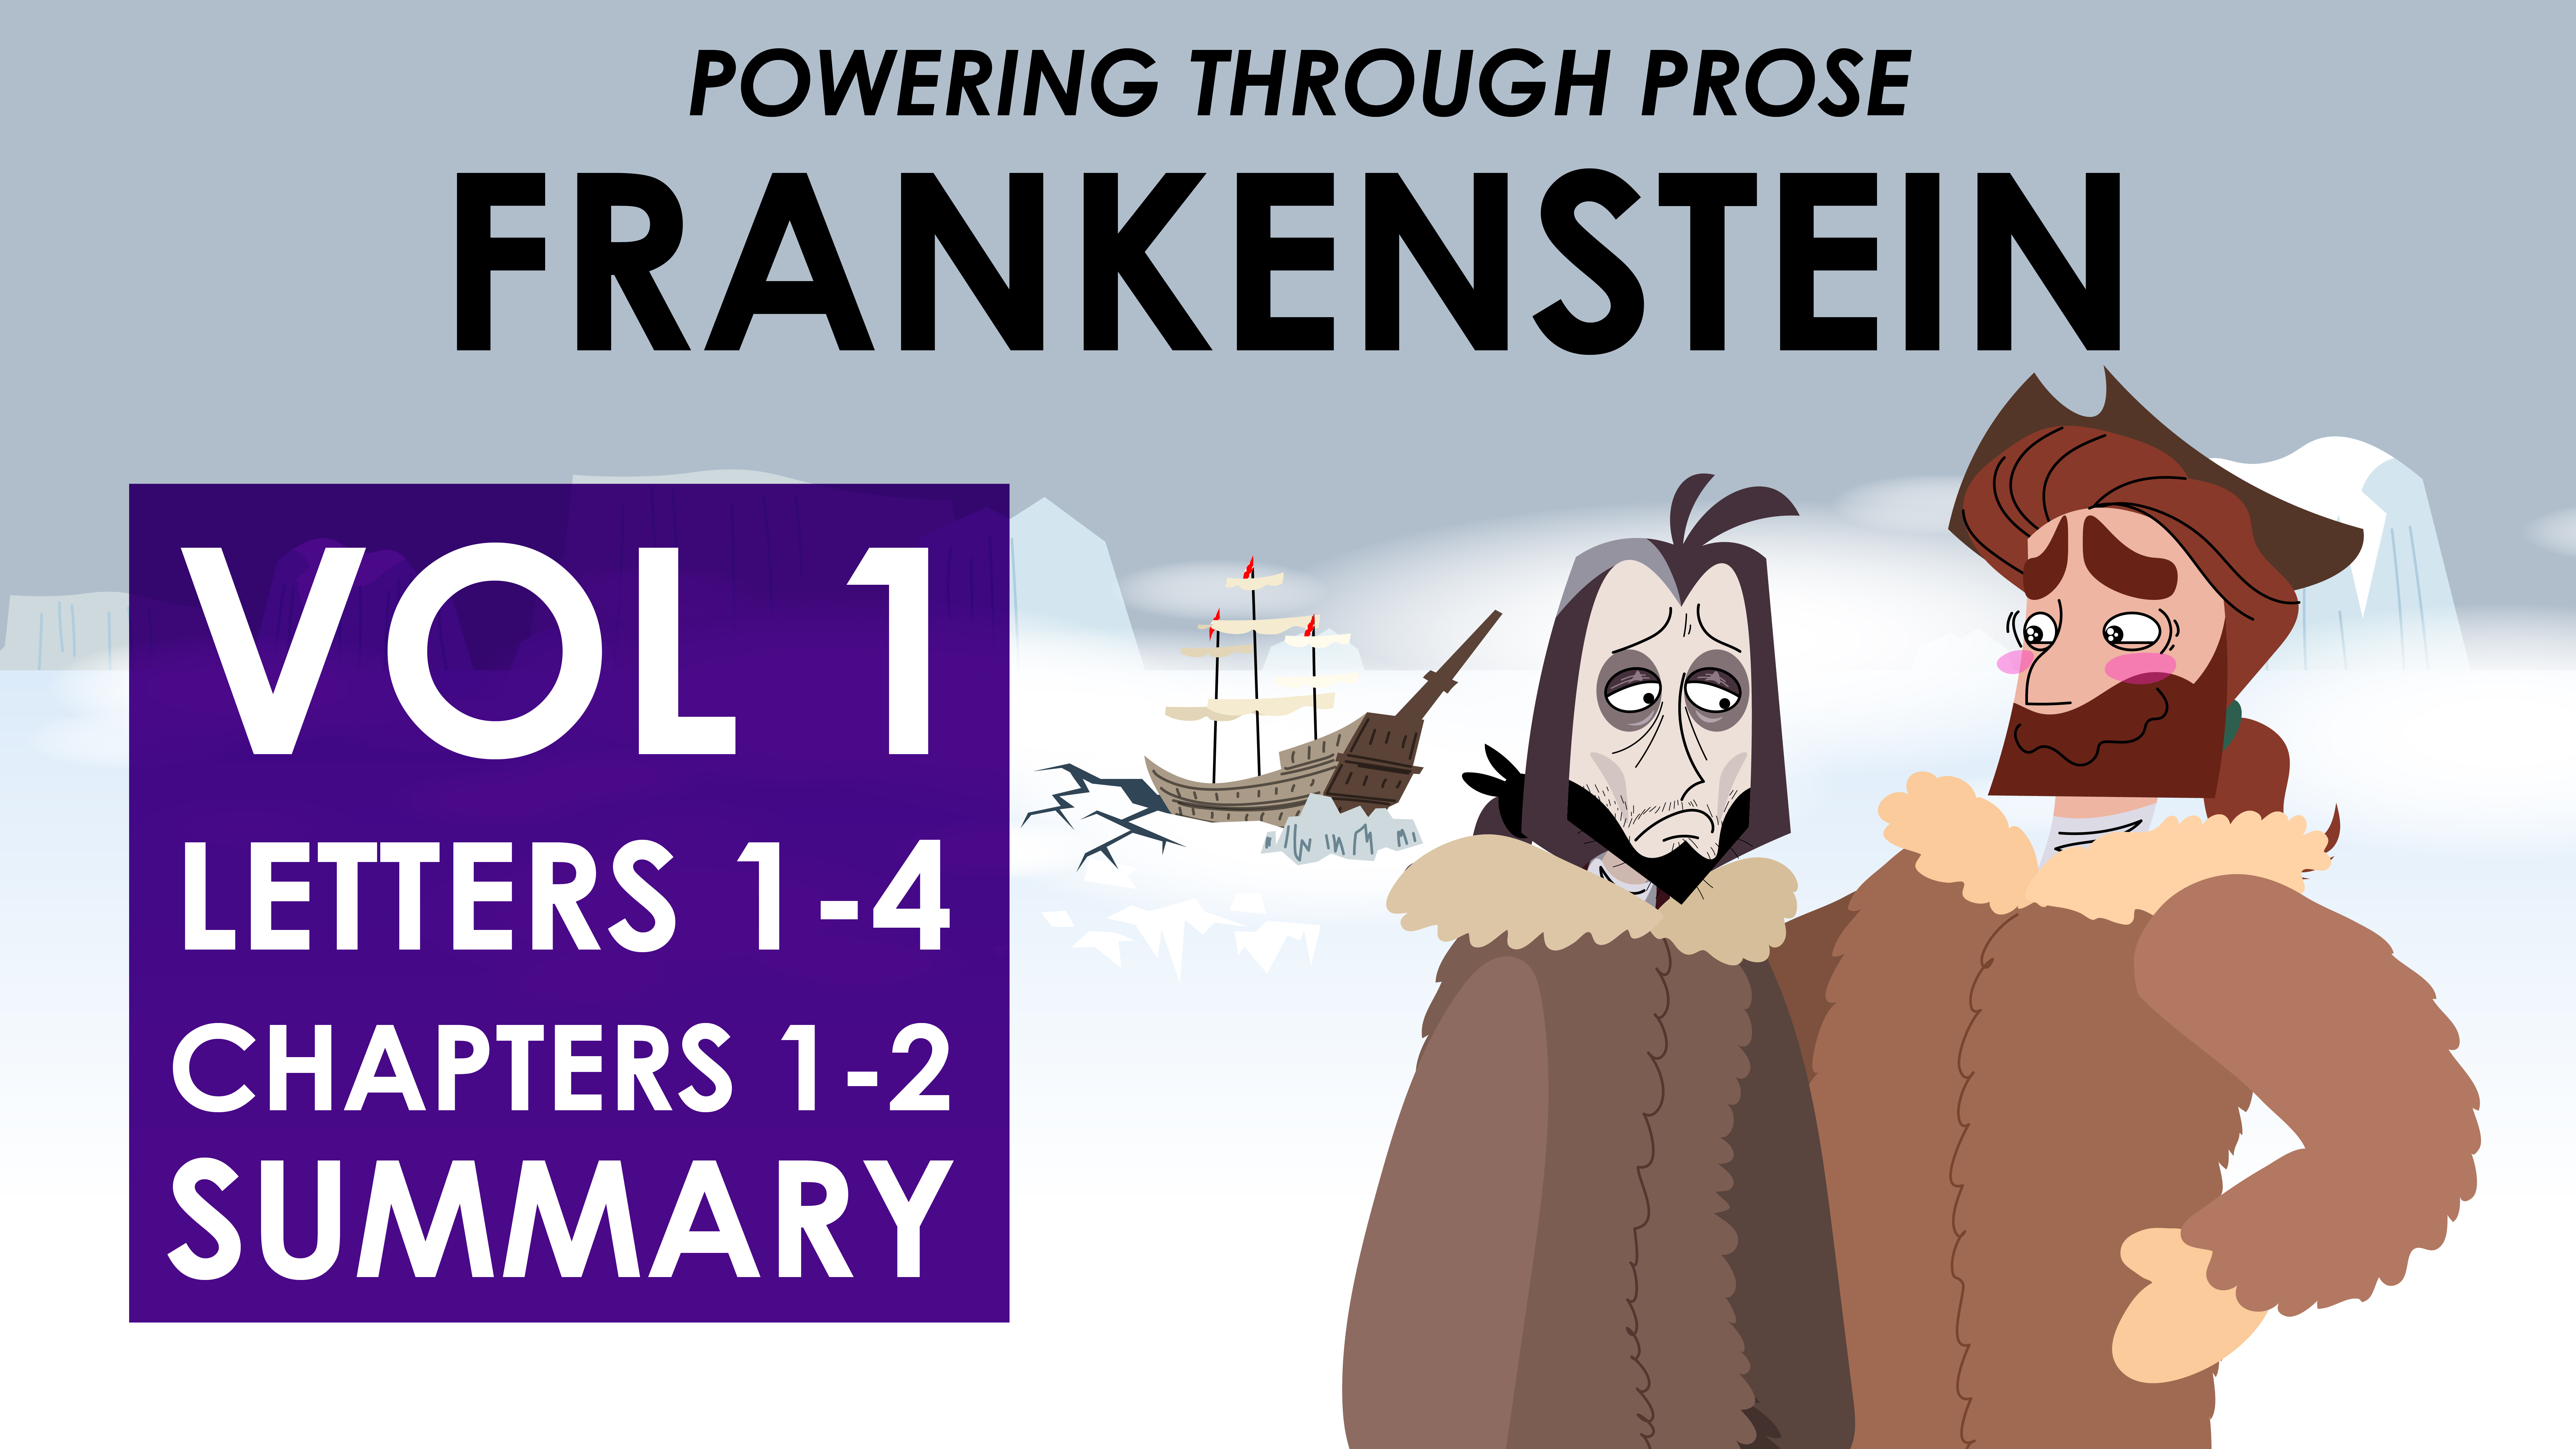 Frankenstein - Mary Shelley - Letters 1-4, Chapters 1-2 - Powering Through Prose Series  